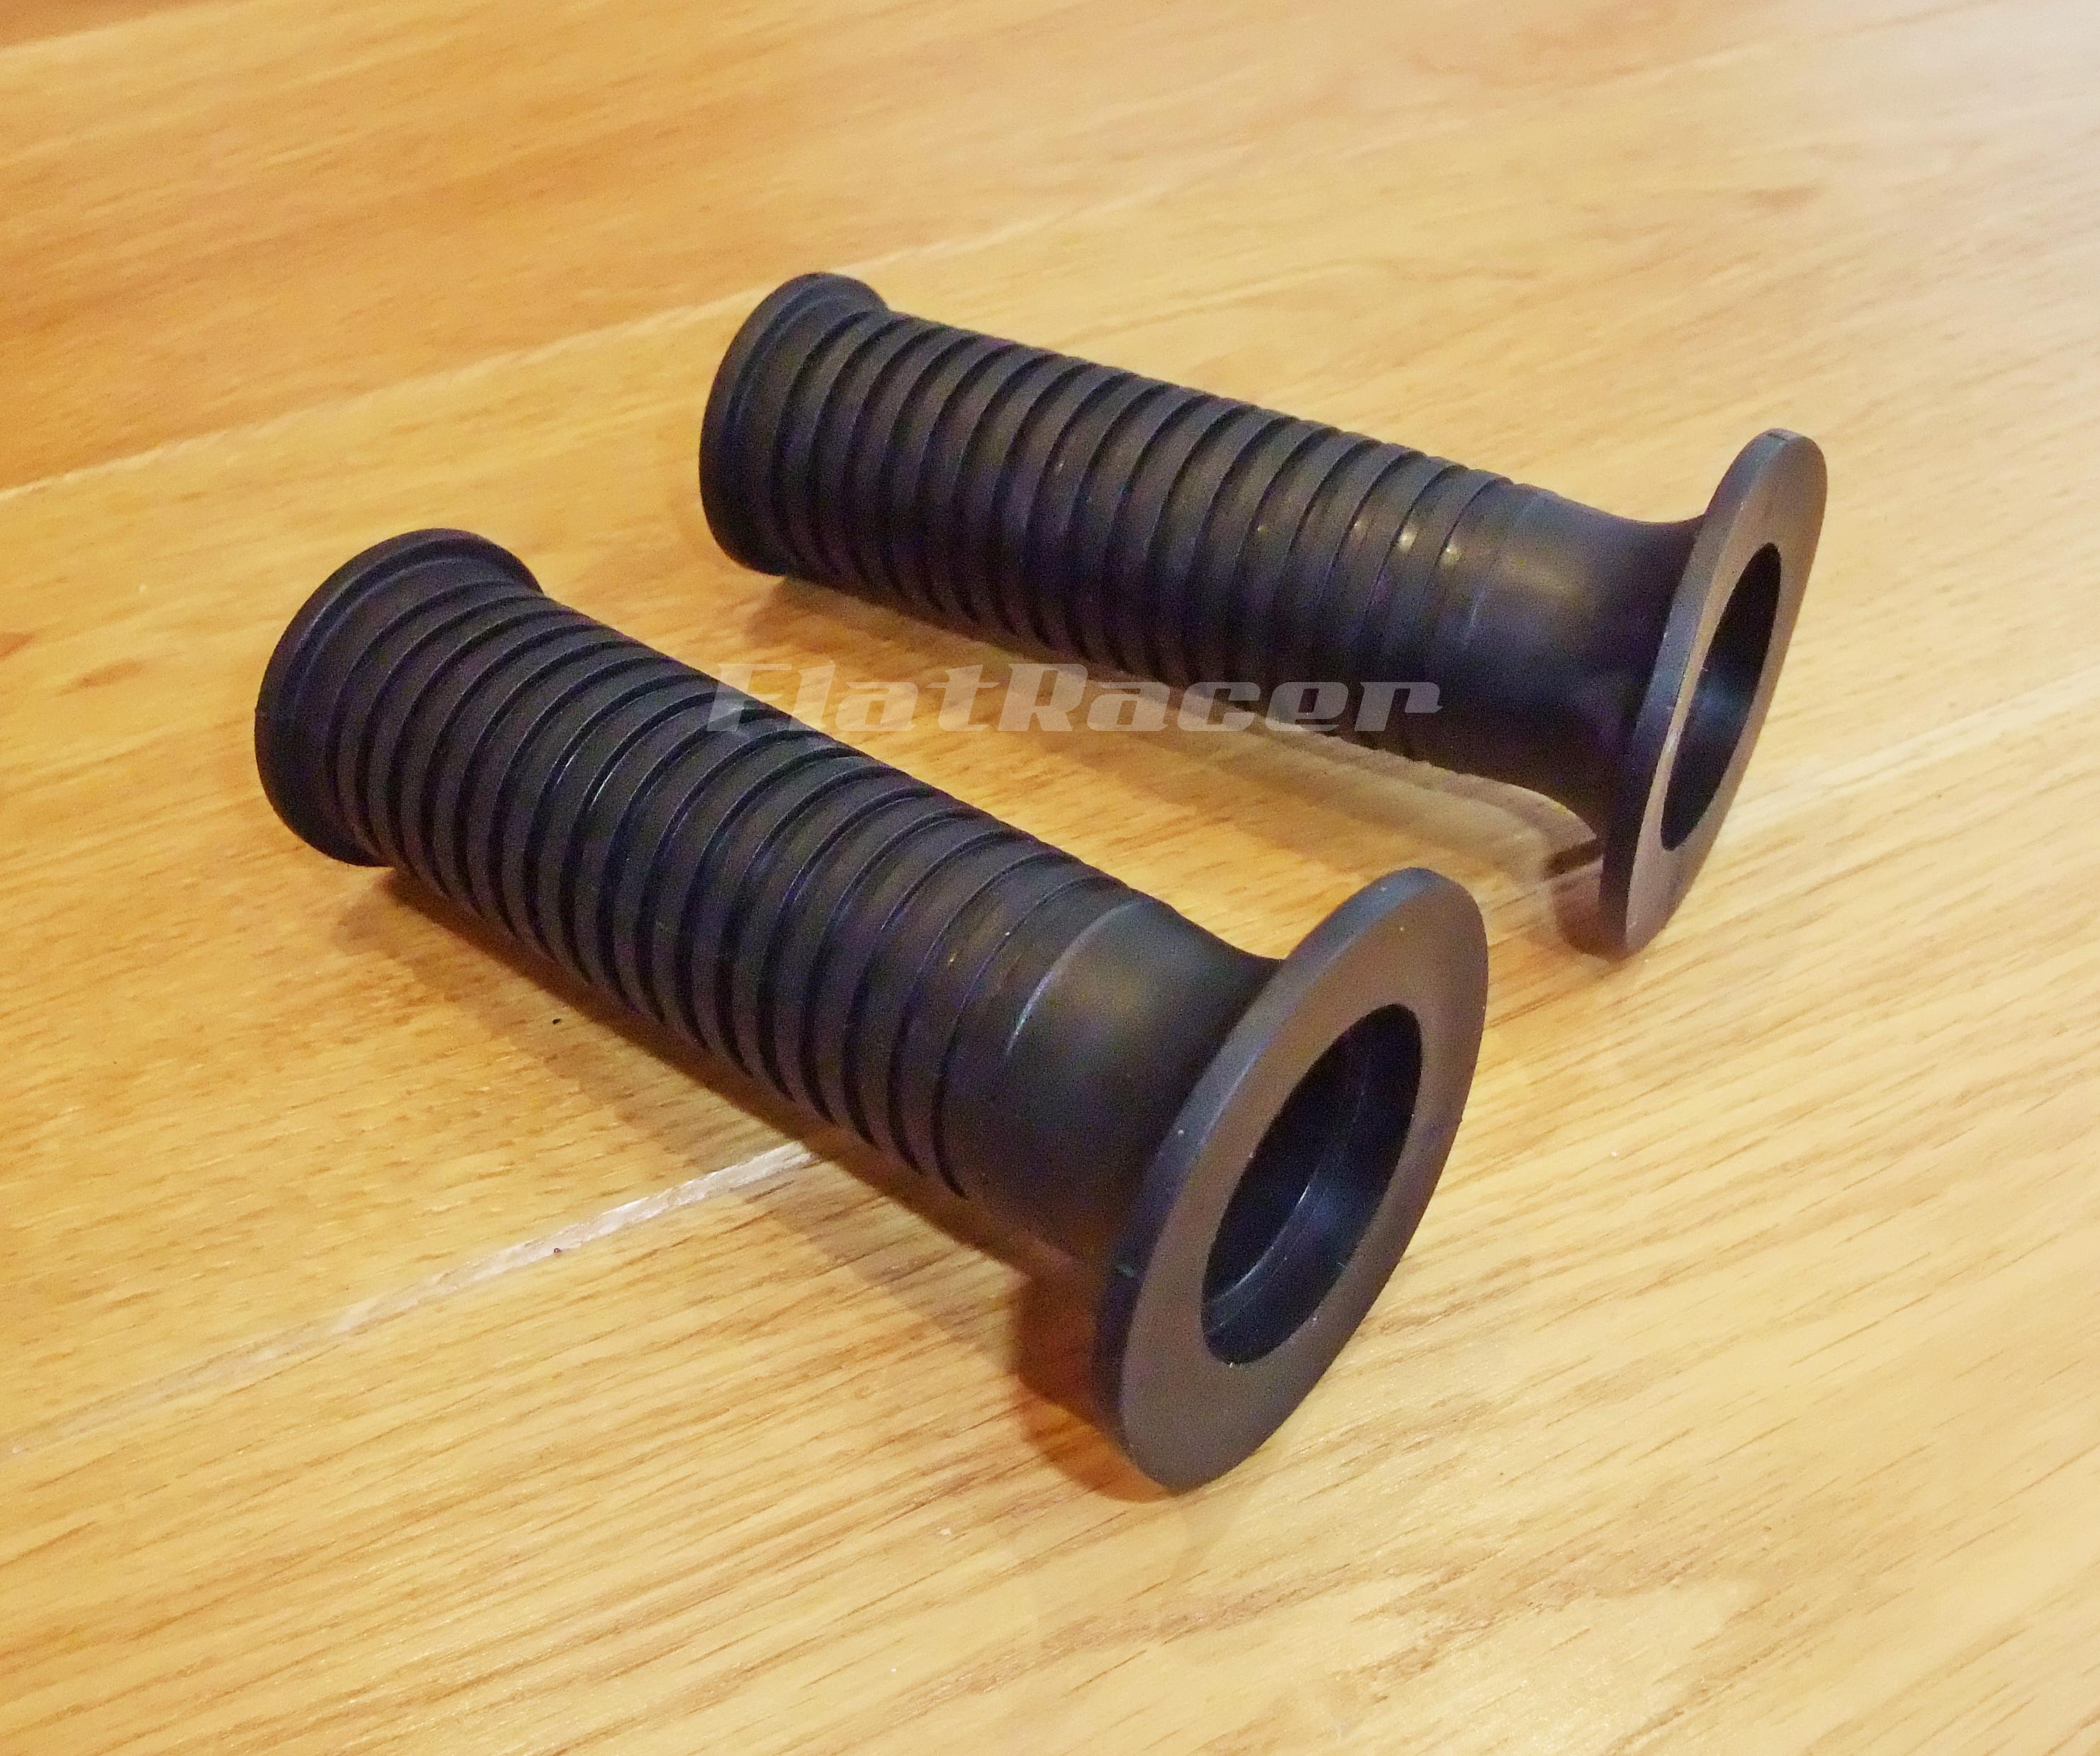 ​BMW K series ribbed motorcycle hand grips